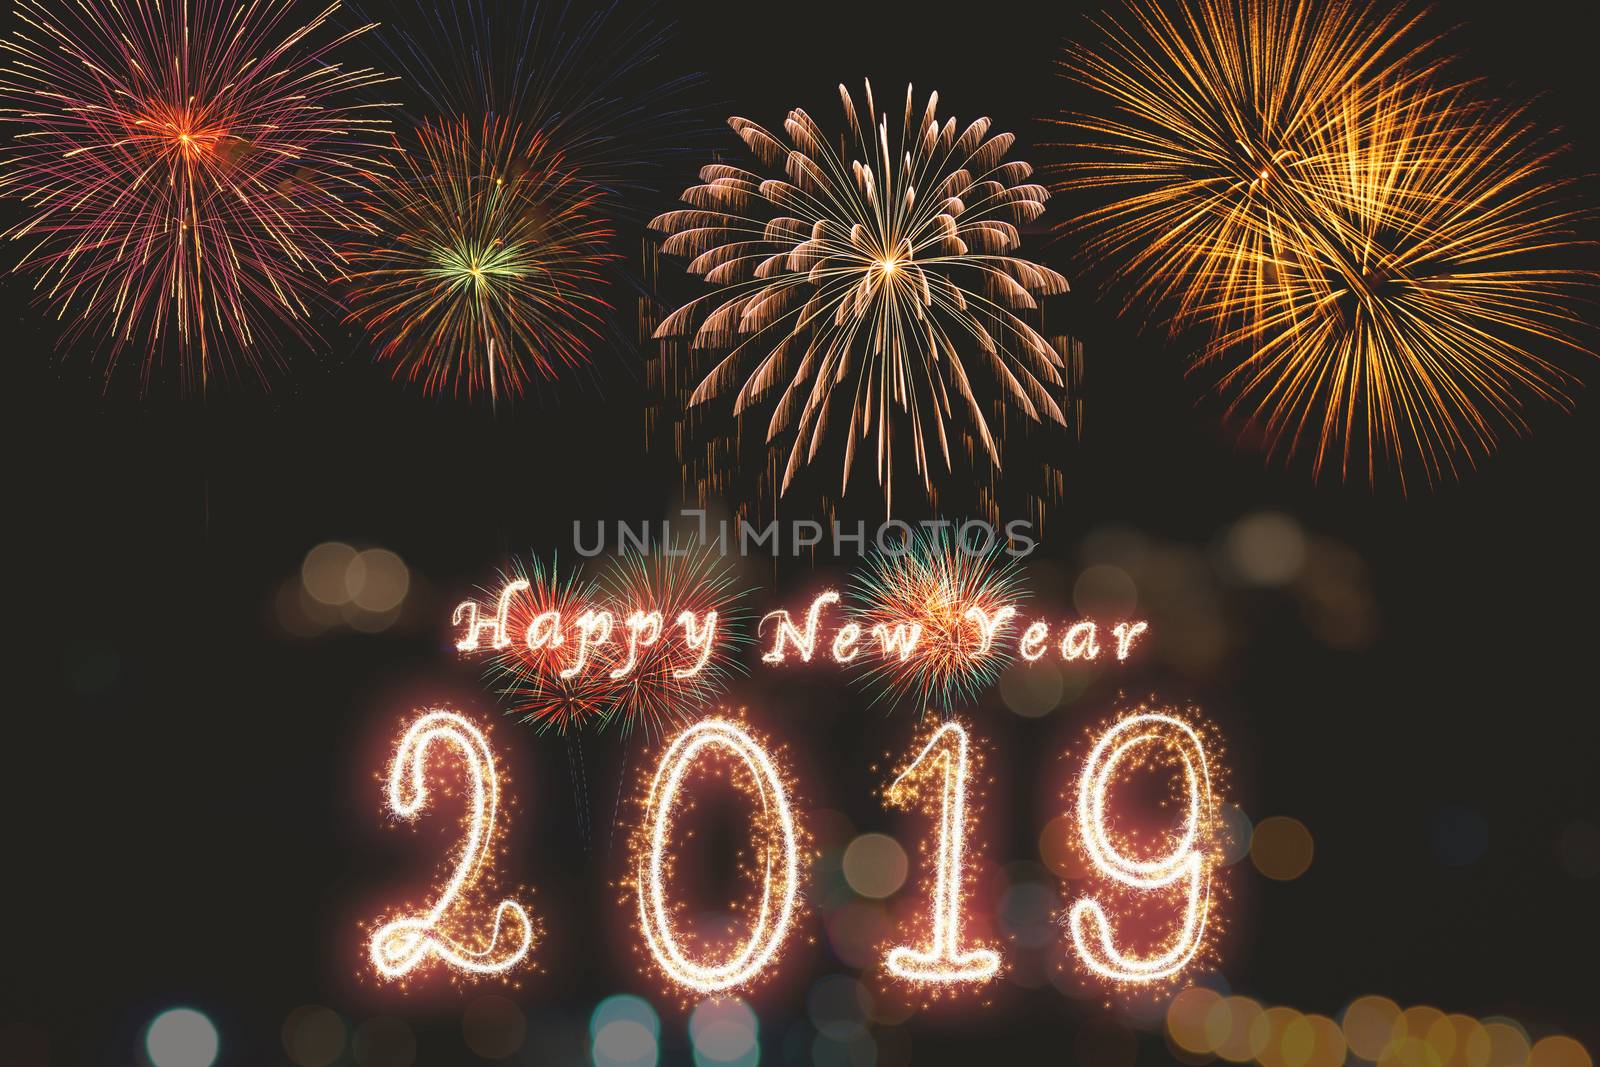 Happy new year 2019 written with Sparkle firework on fireworks with dark background, celebration and greeting cards concept